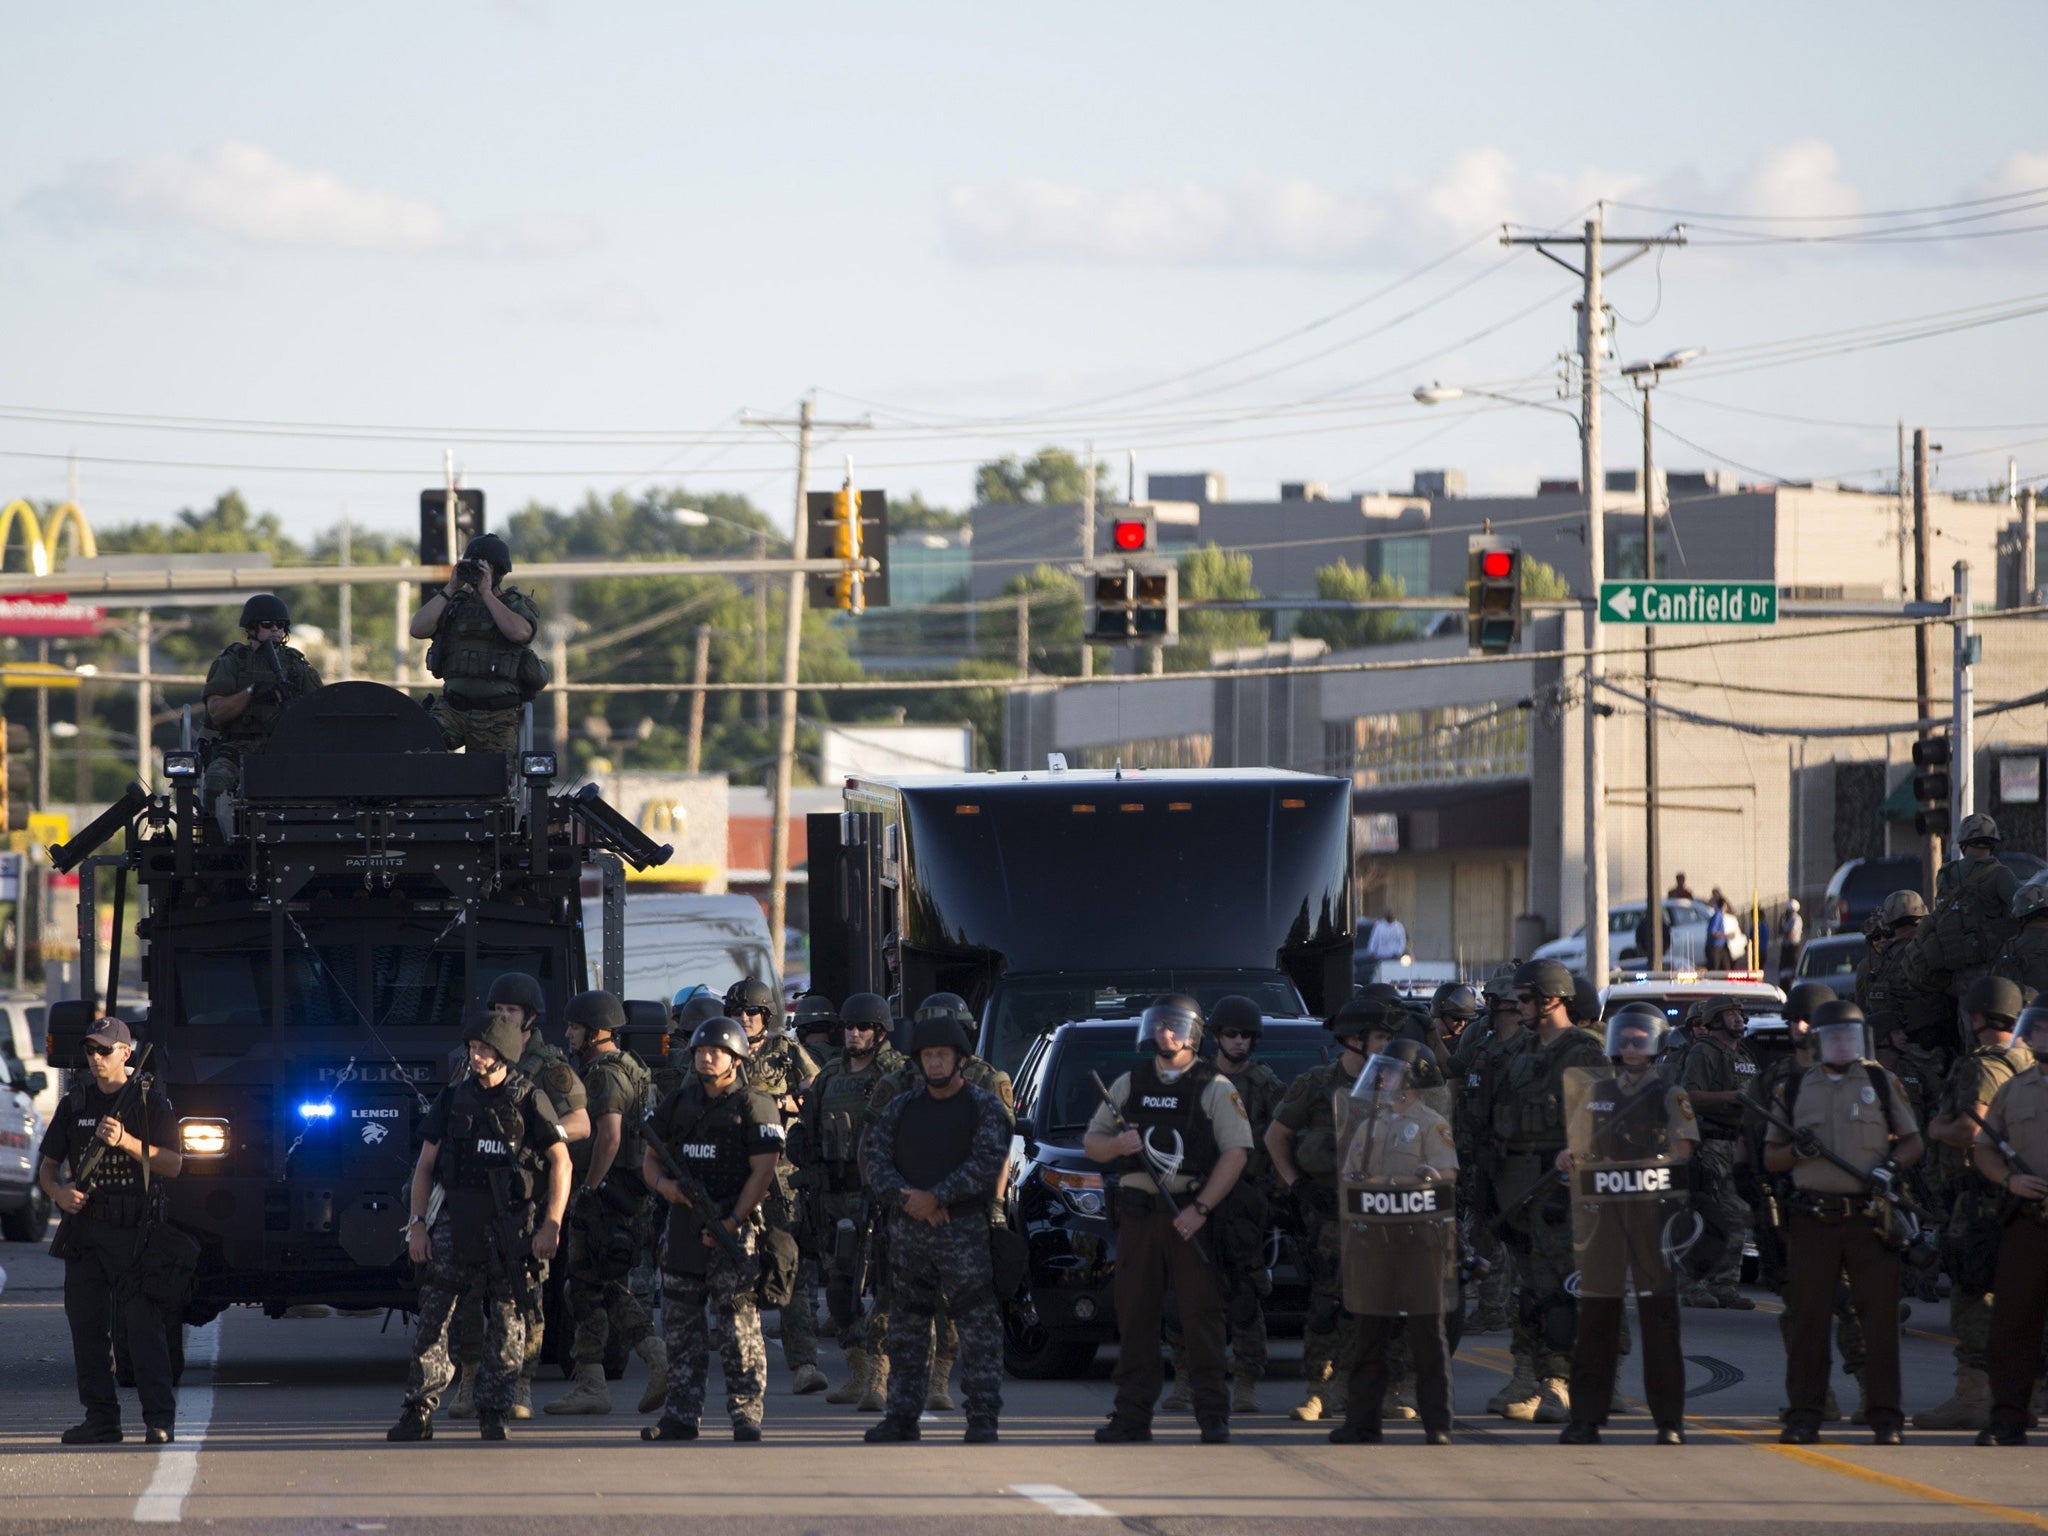 Police officers keep watch while demonstrators (not pictured) protest the death of black teenager Michael Brown in Ferguson, Missouri August 12, 2014